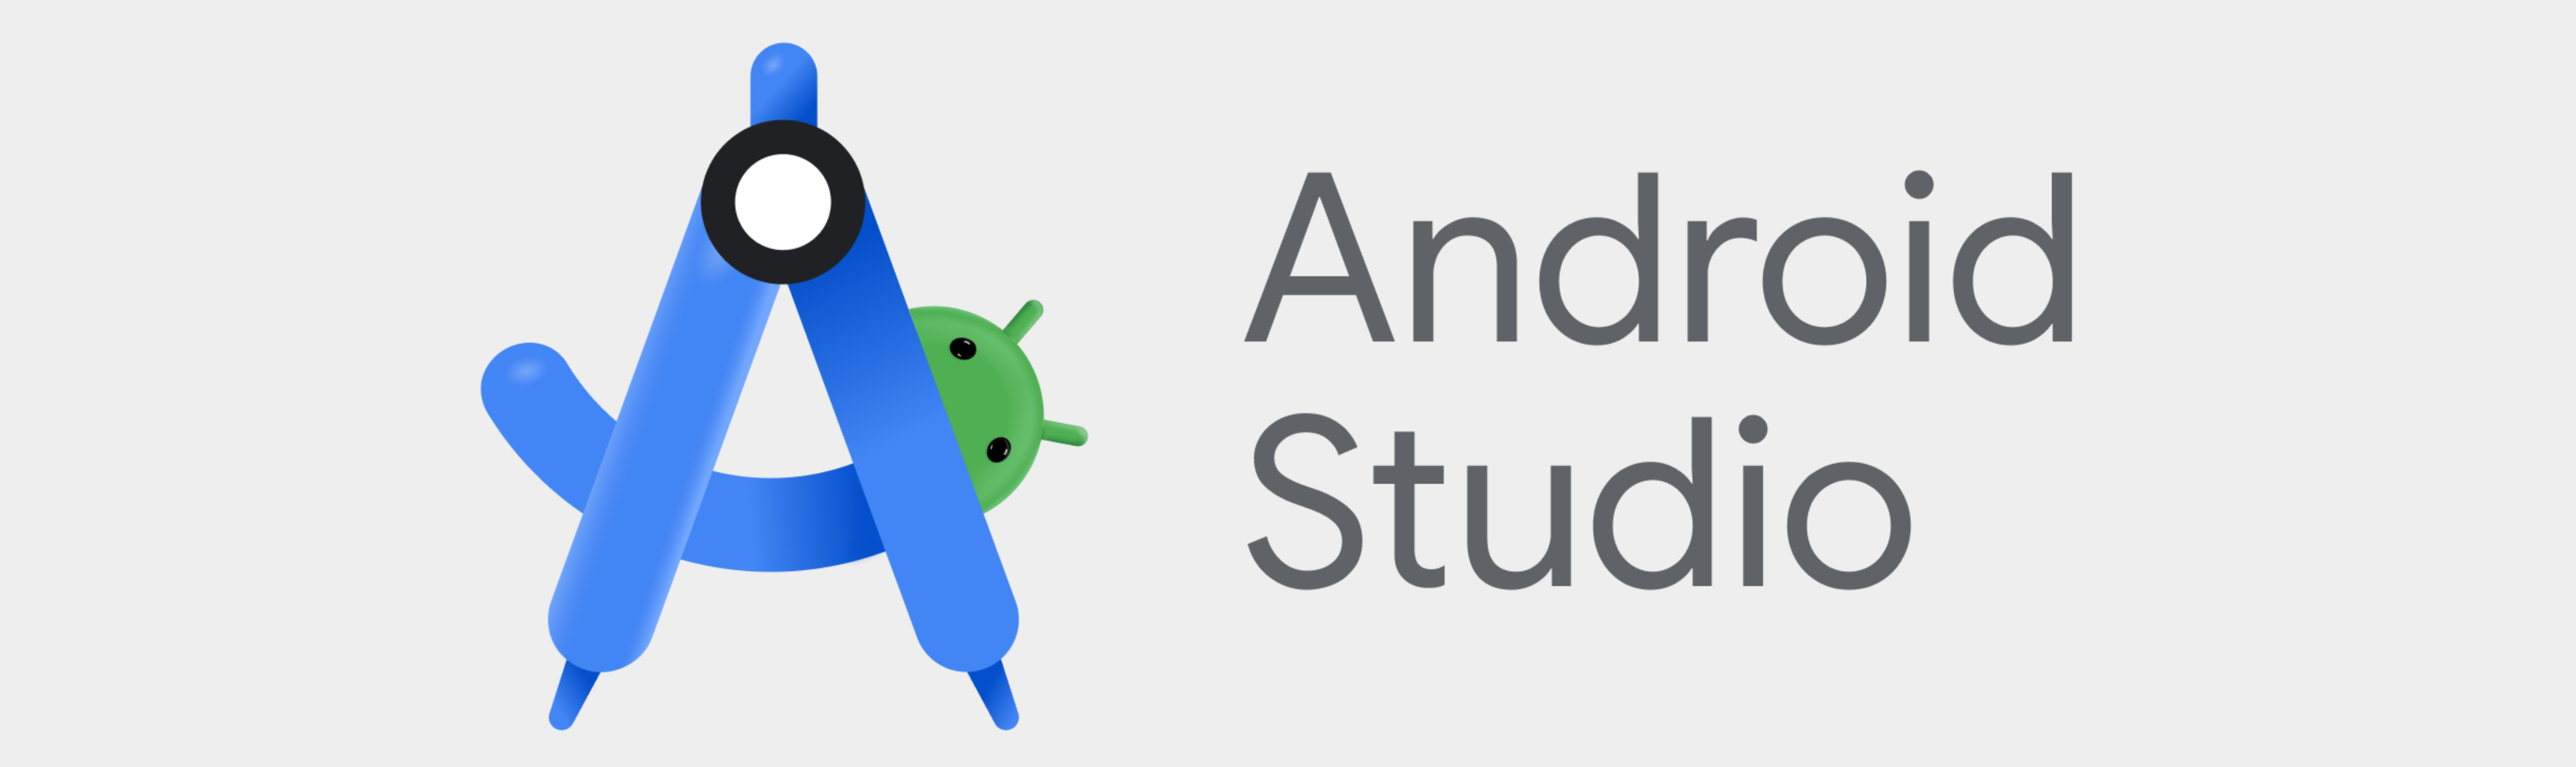 Android-Studio-banner (1)